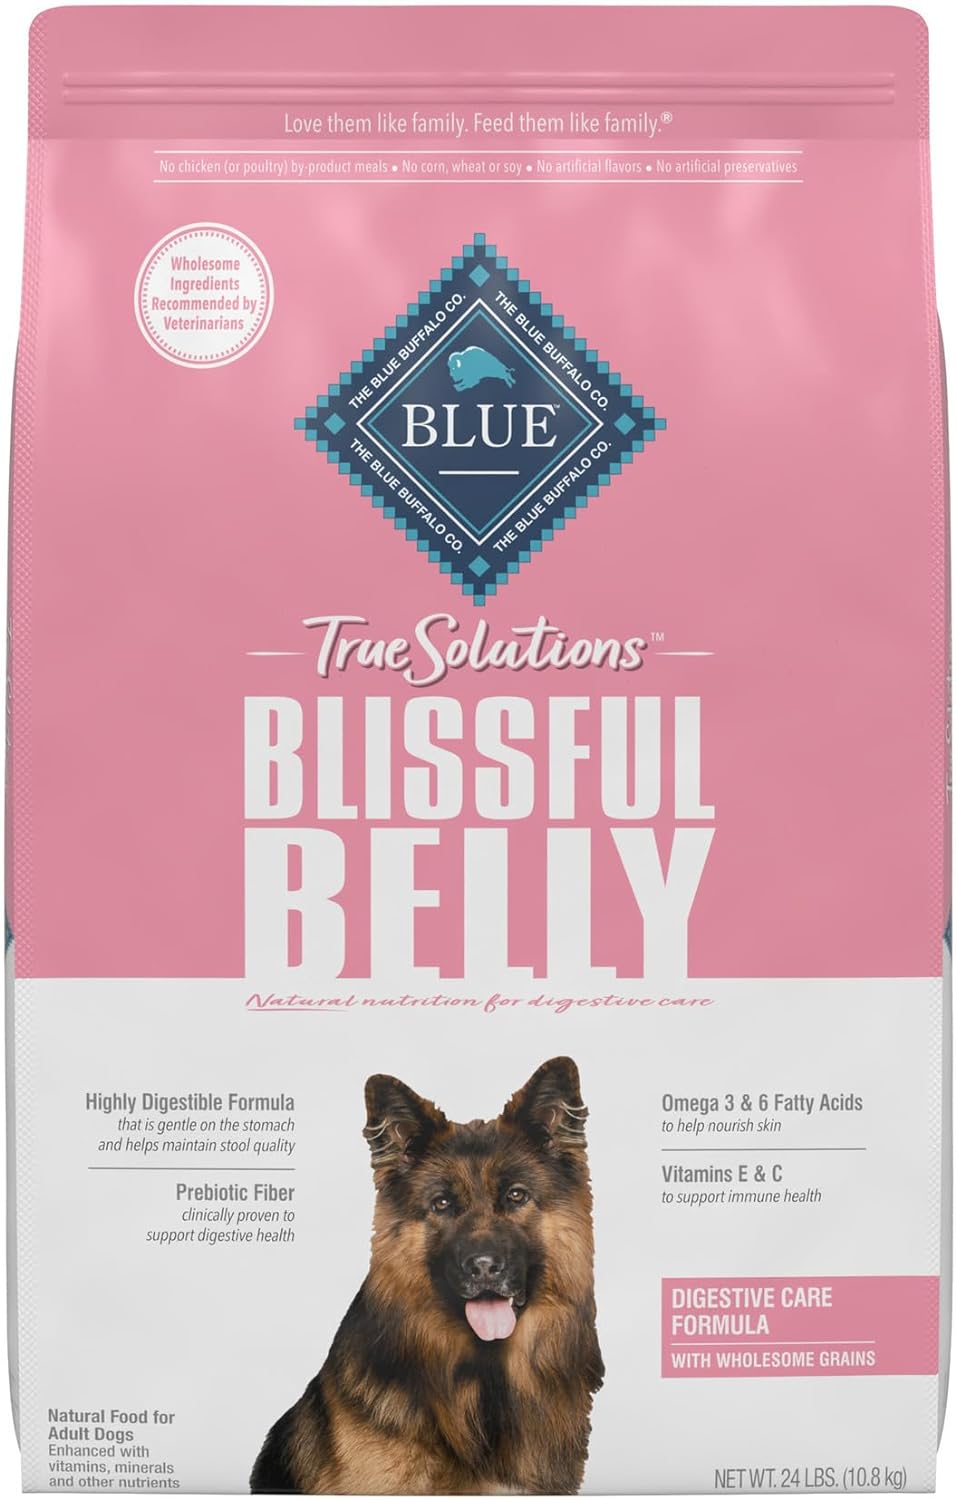 Blue True Solutions Blissful Belly Digestive Care Formula Dry Dog Food – Gallery Image 1